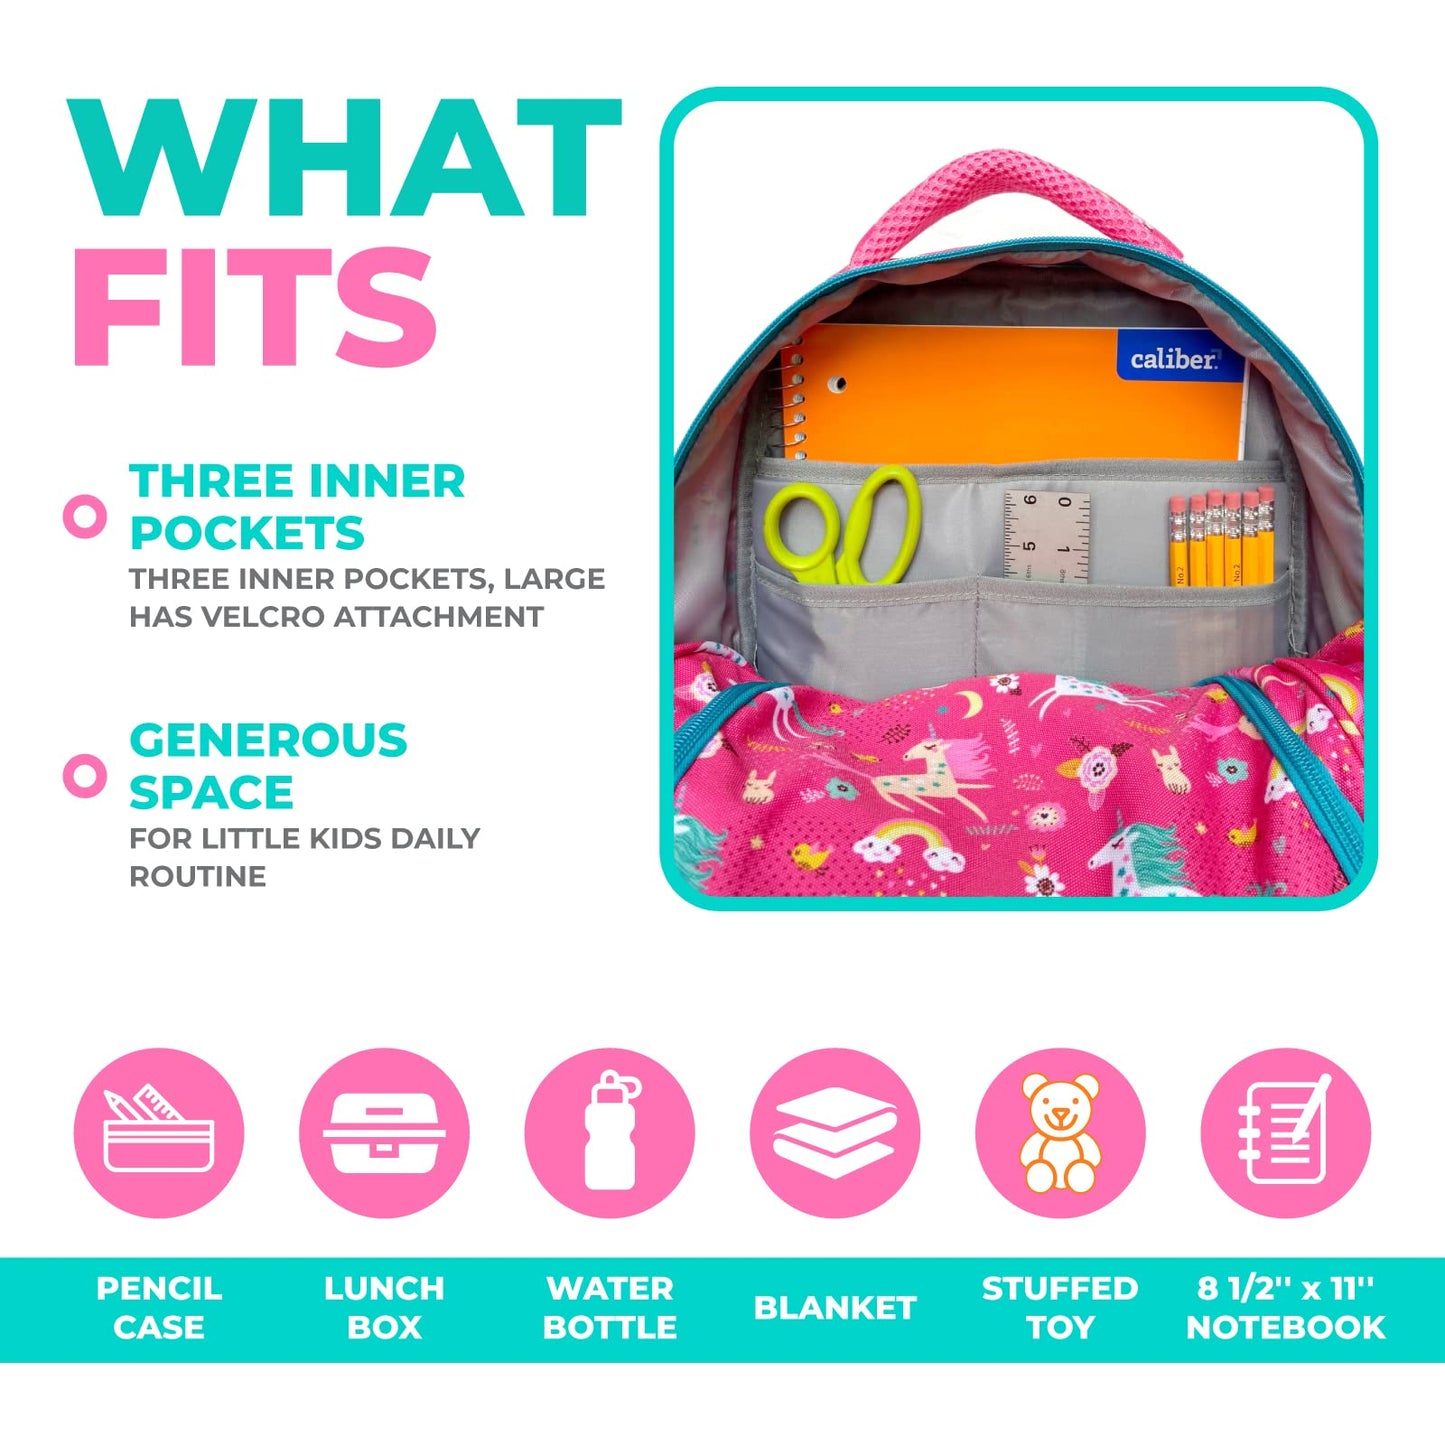 Small Backpack for Toddlers, Little Kids Daycare, Pre-School, Kindergarten